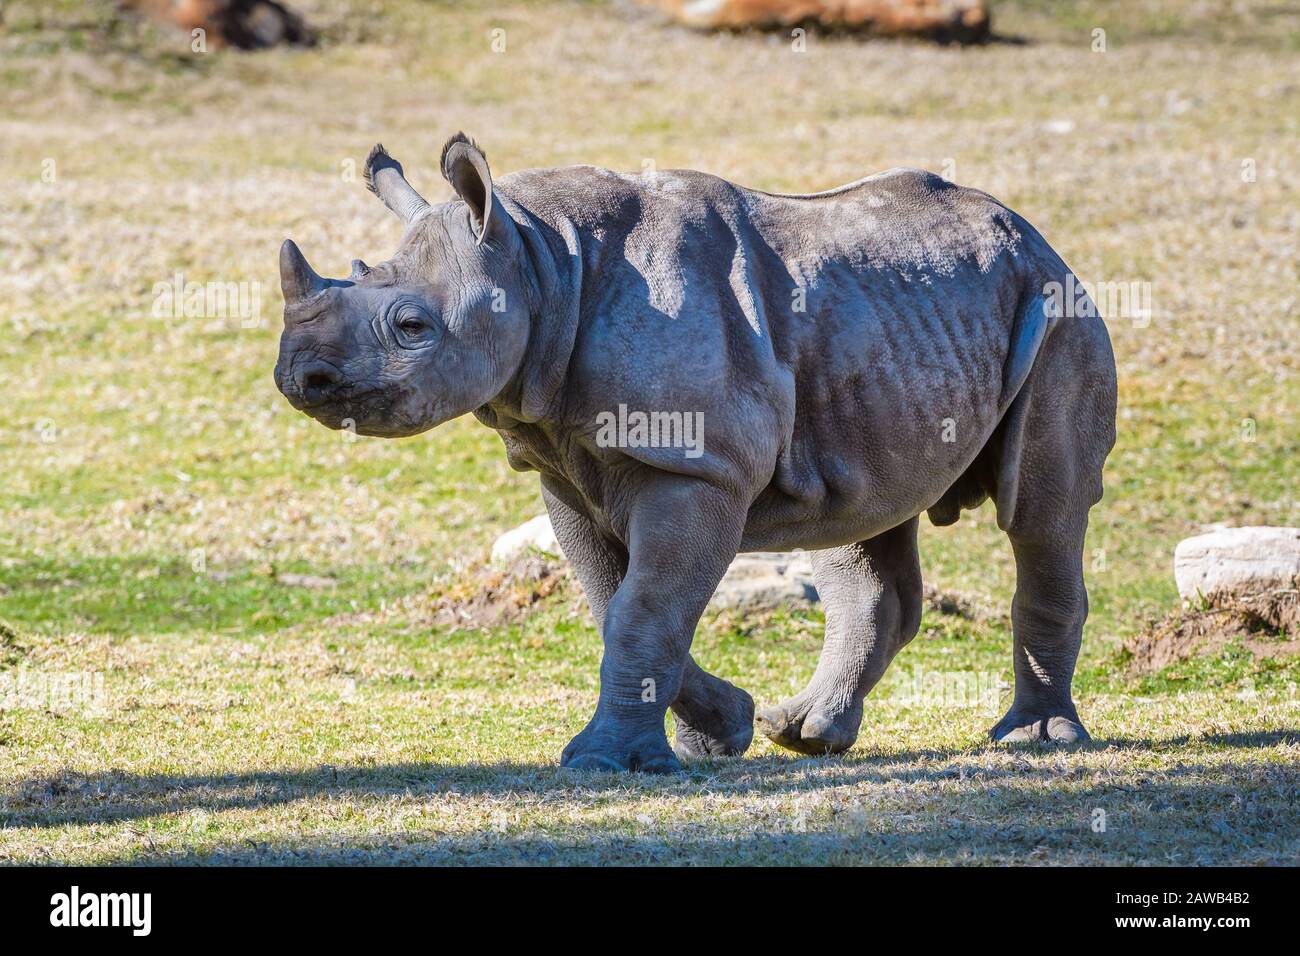 Full length environmental portrait of a walking white rhinocerous at Dubbo's conservation reserve in New south Wales, Australia. Stock Photo